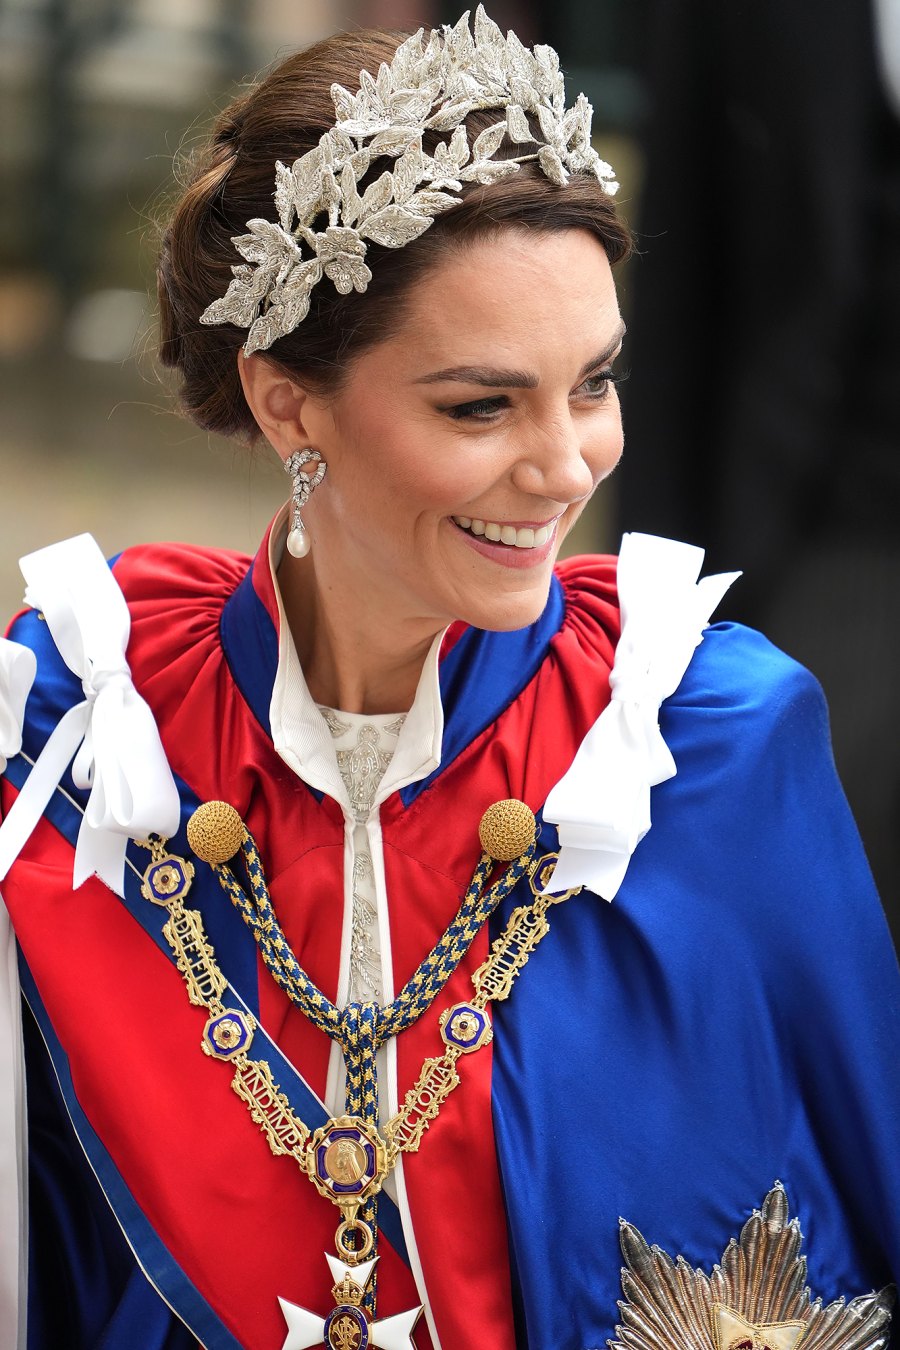 Kate Middleton King Charles III’s Coronation See All the Fashion Nods to Queen Elizabeth II